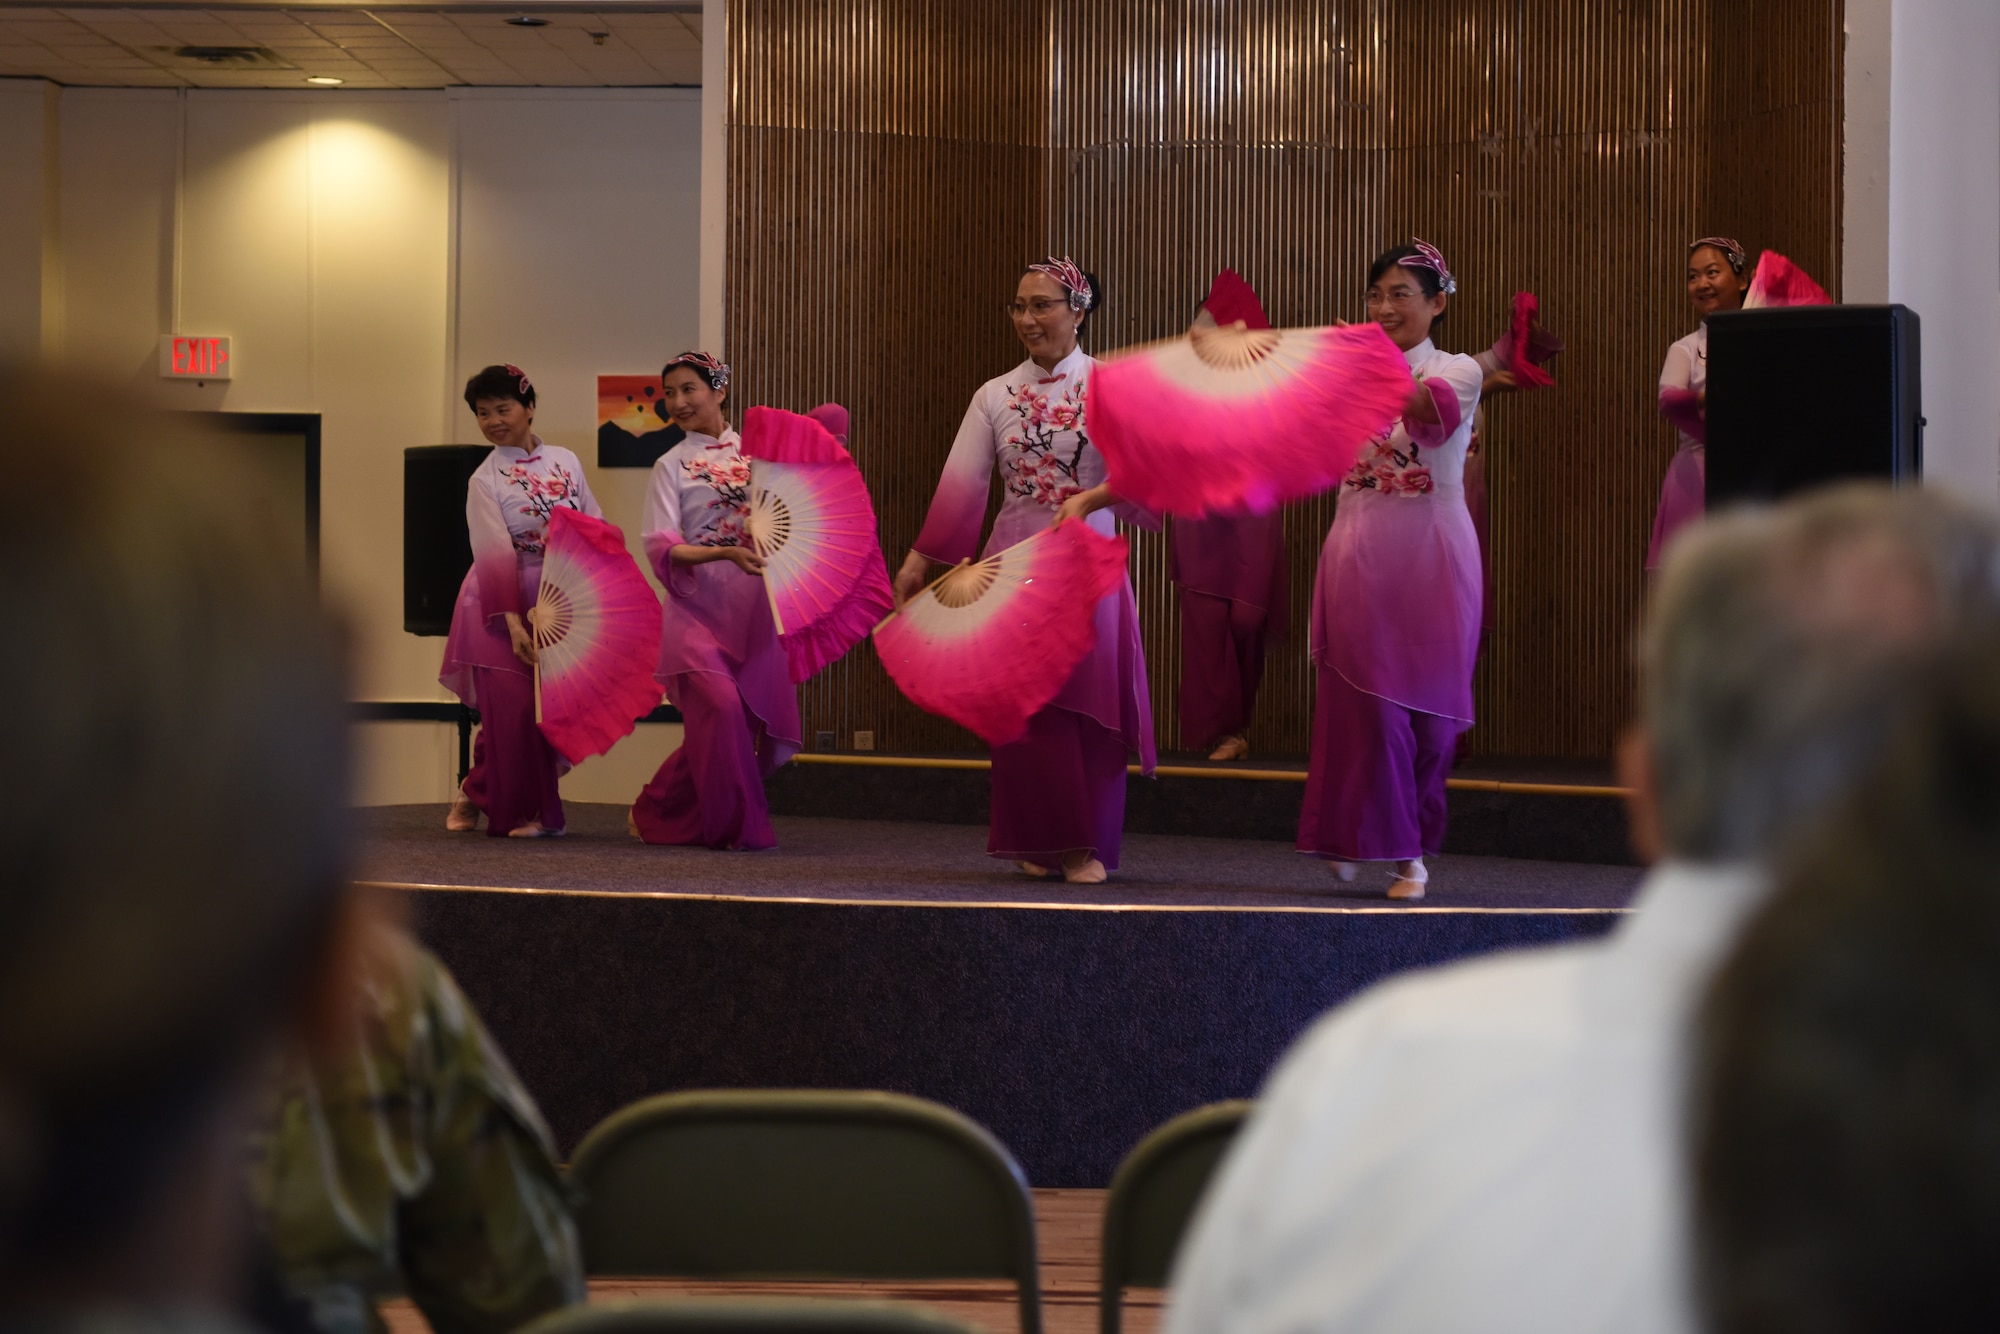 Audience members of the Asian-American Pacific Islander Heritage Month Cultural Show and Luncheon watch a cultural performance at Kirtland Air Force Base, N.M., May 22, 2019. Attendees were treated to a meal as well as various performances. (U.S. Air Force photo by Senior Airman Eli Chevalier)